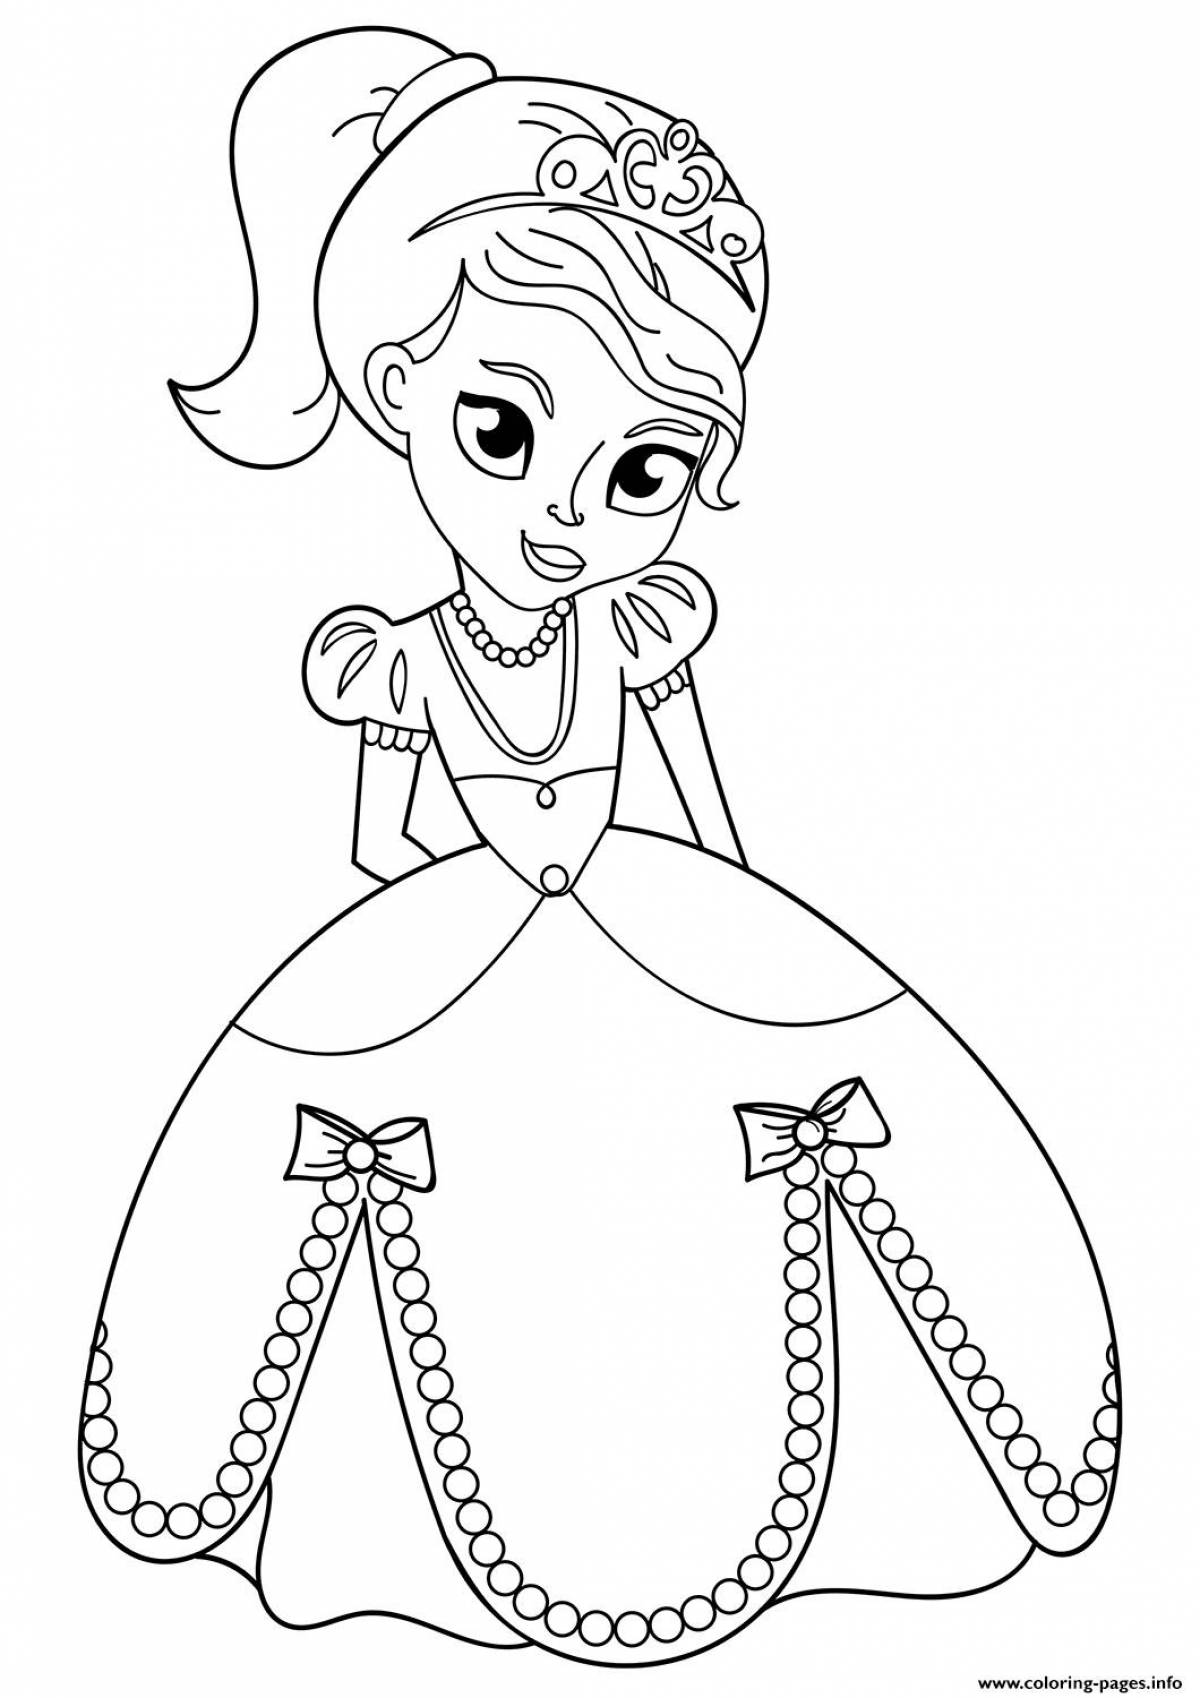 Amazing coloring book for children 6-7 years old princess